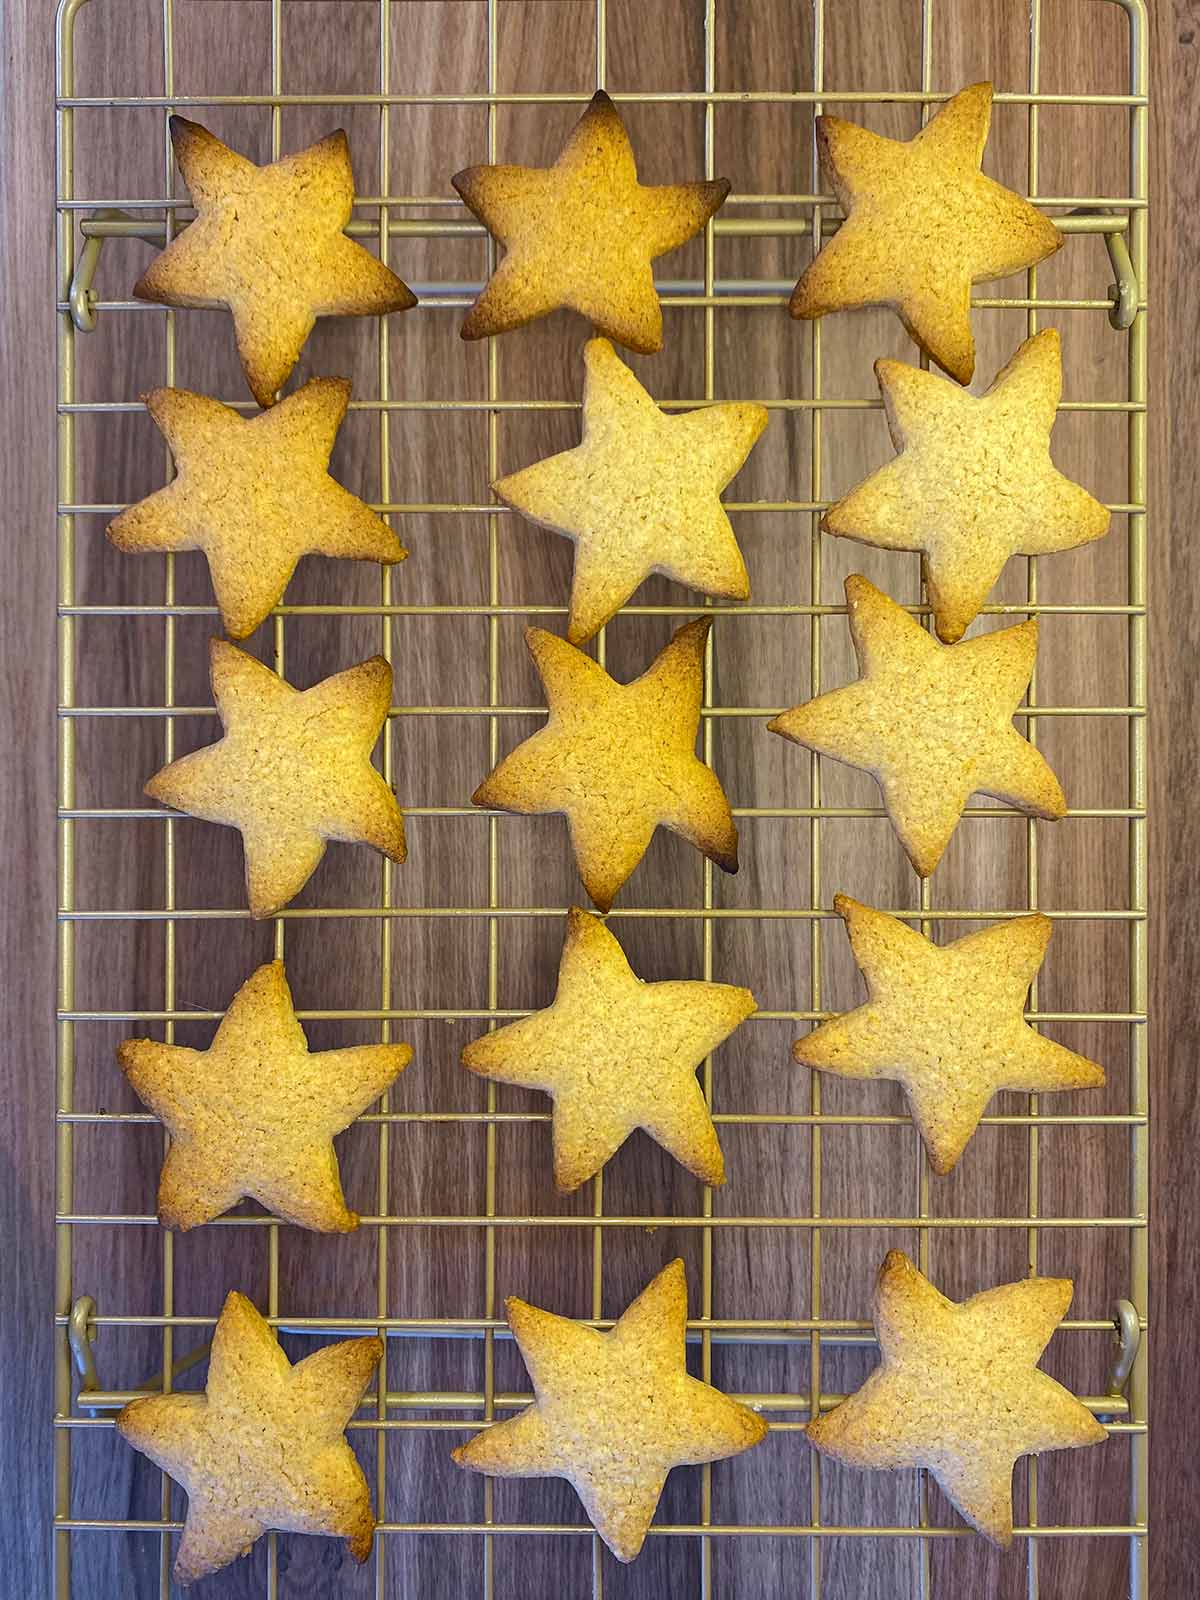 Cooked star shaped biscuits cooling on a wire rack.